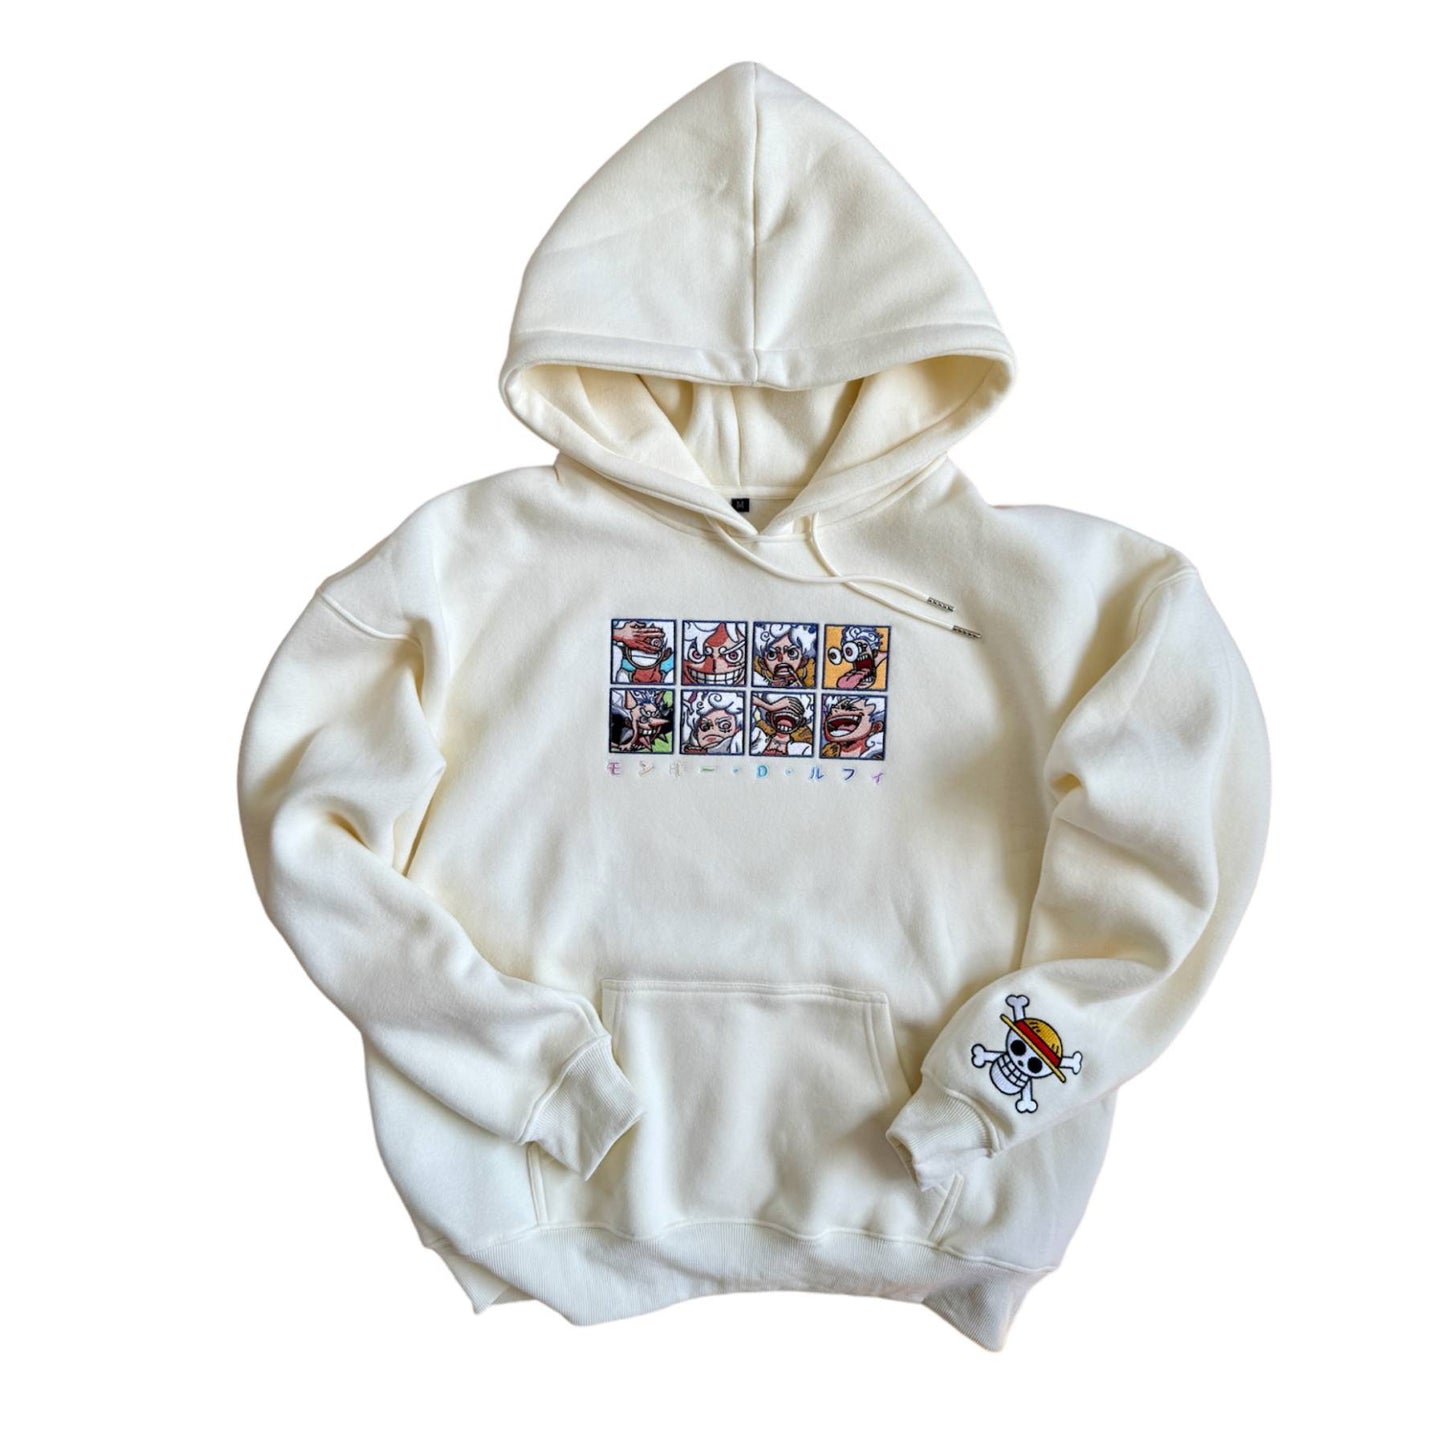 Oversized G5 Faces Hoodie